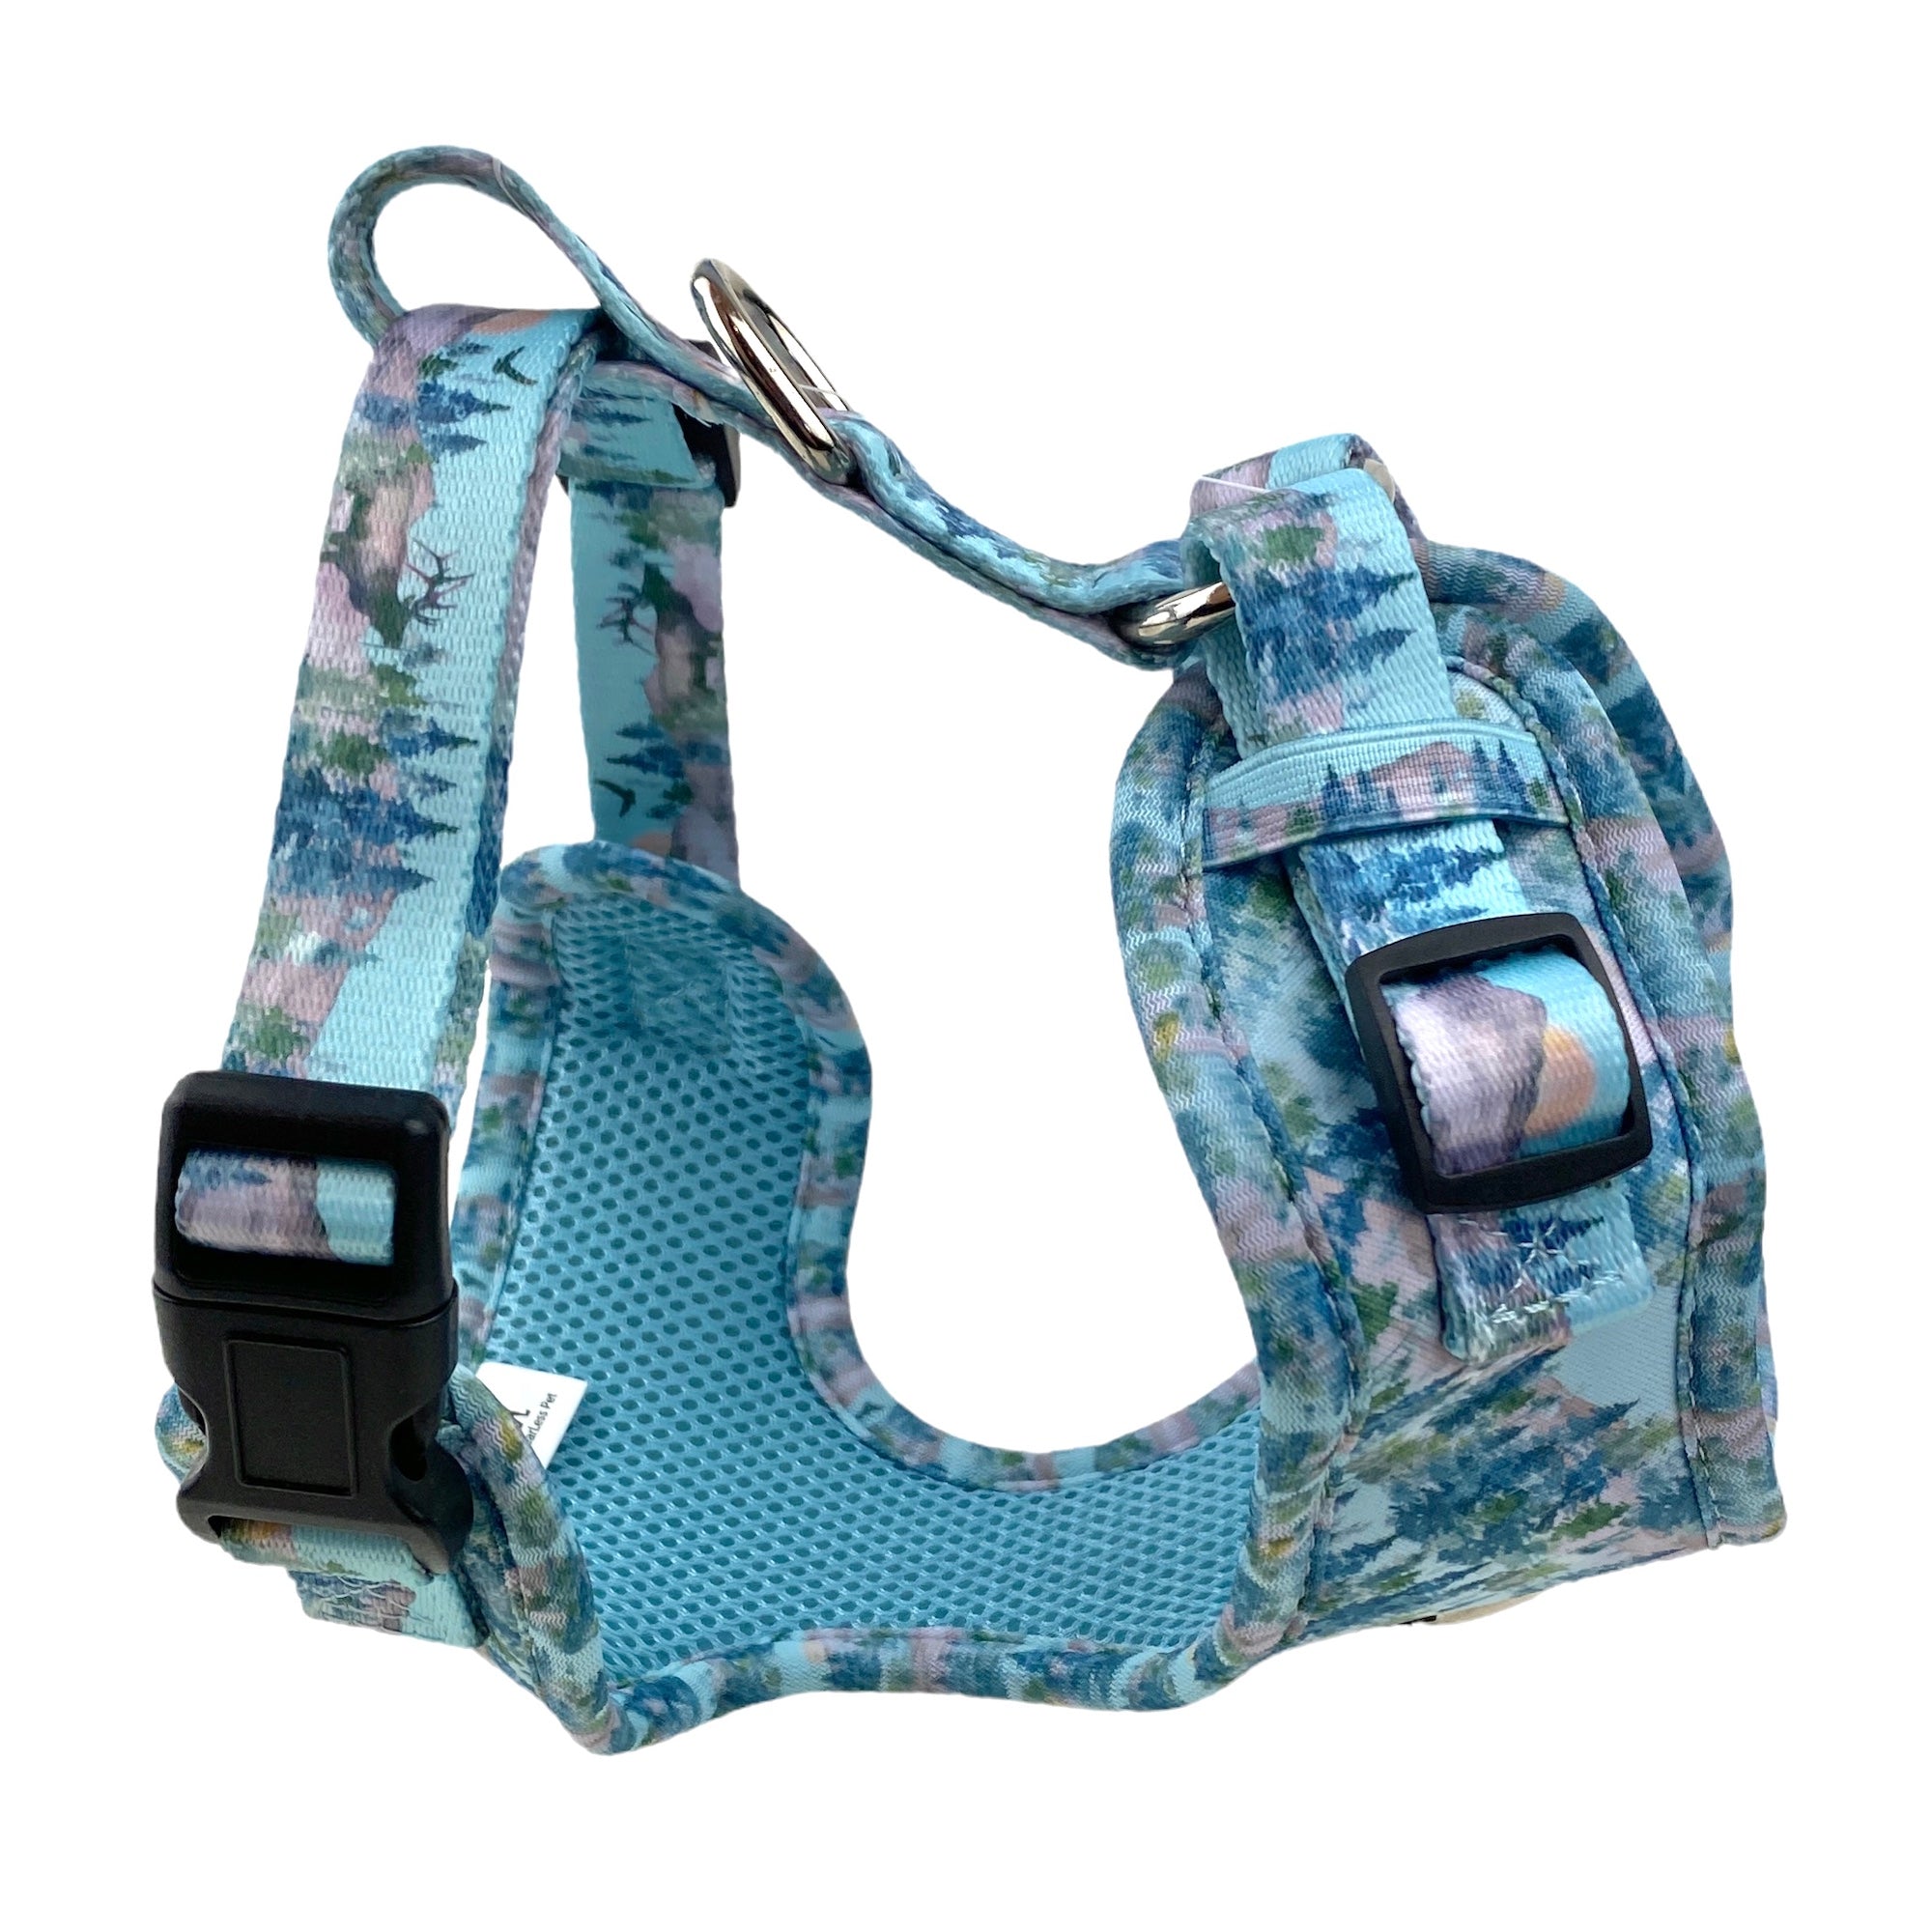 a 3d photo of an adjustable dog harness in a light blue mountain print from fearless pet escape proof dog harness for small medium dogs